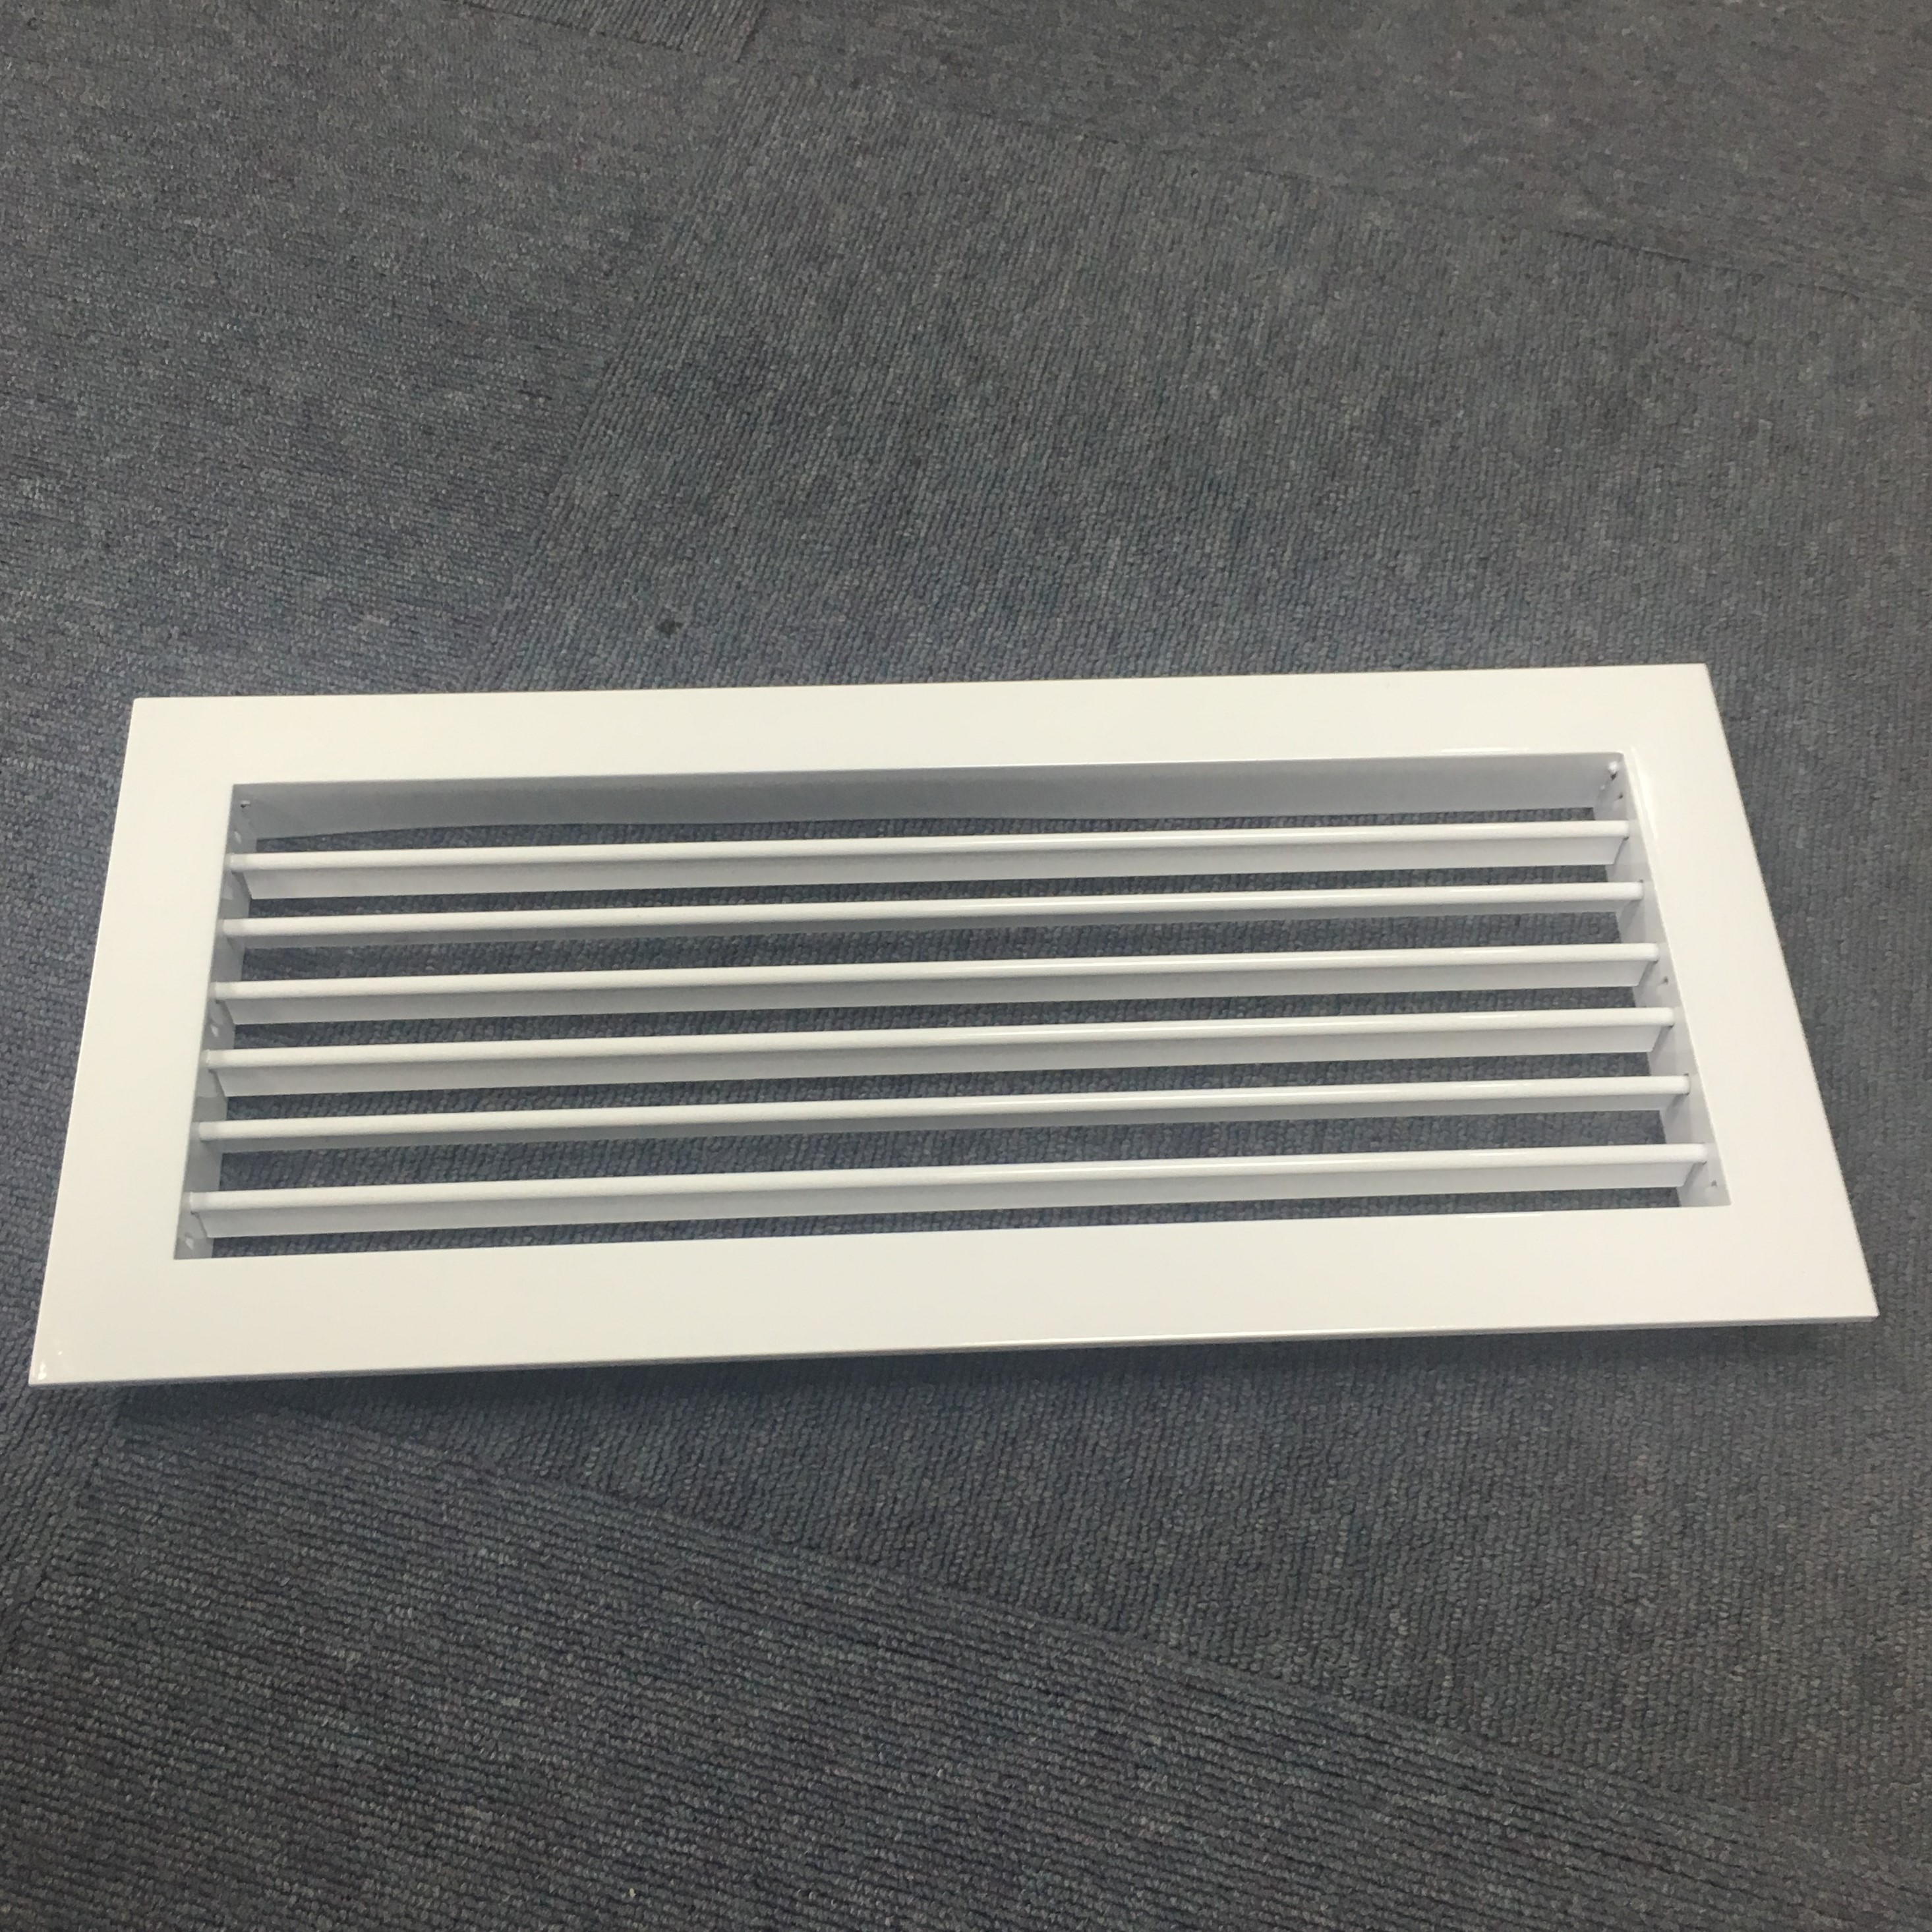 Powder Coated Exhaust Air Grill, For Industrial